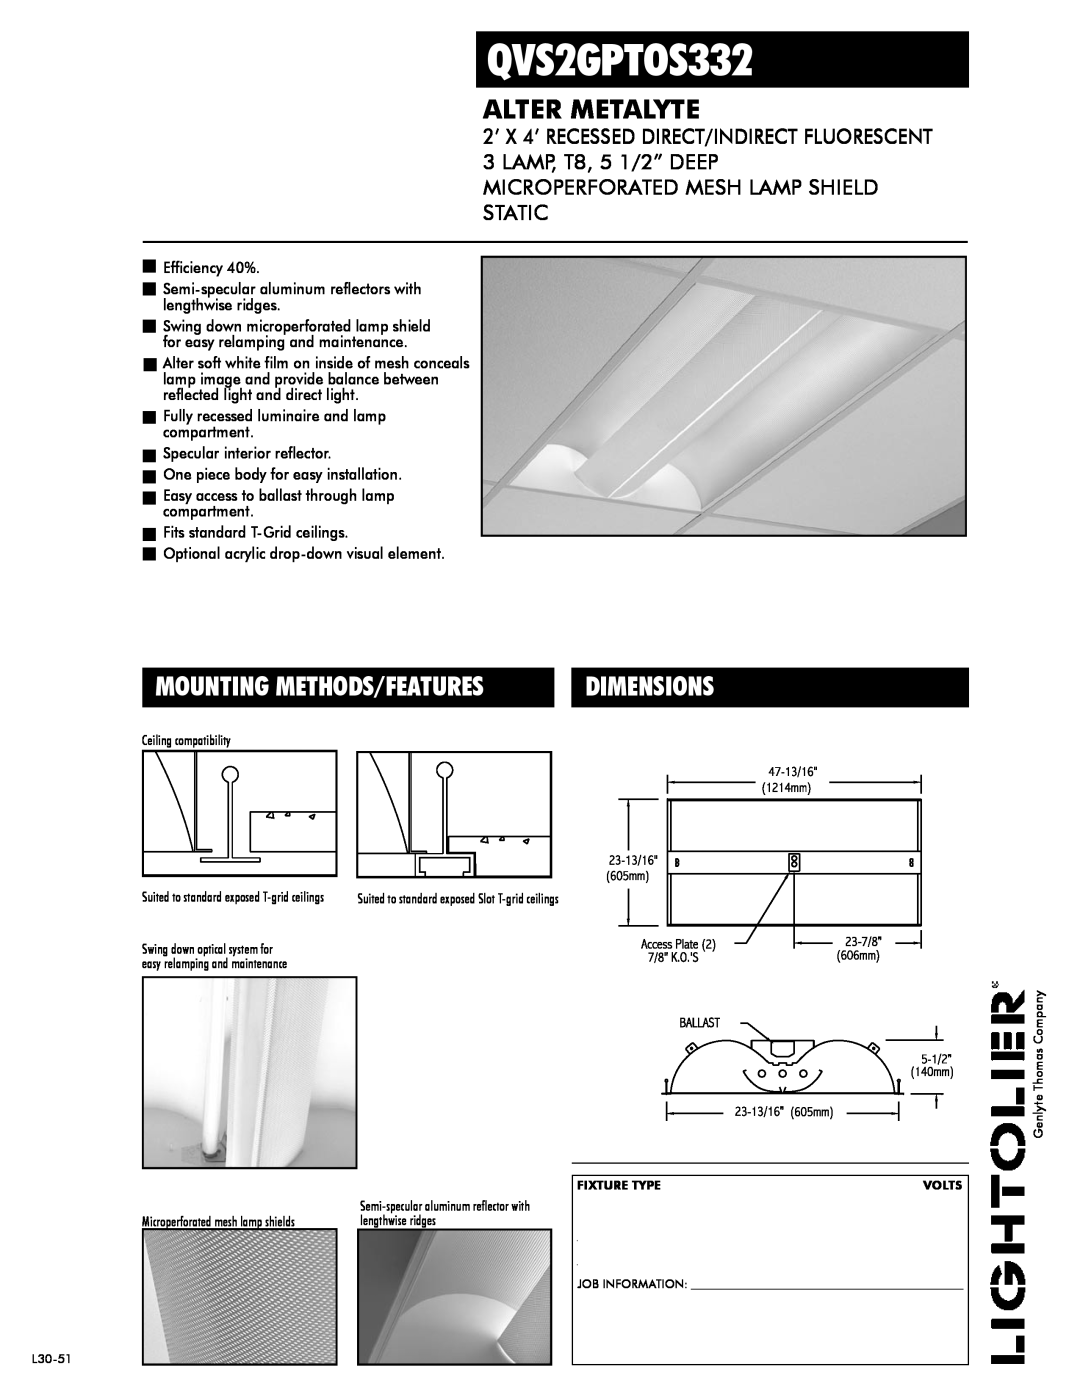 Lightolier QVS2GPTOS332 dimensions Alter Metalyte, Dimensions, Mounting Methods/Features 